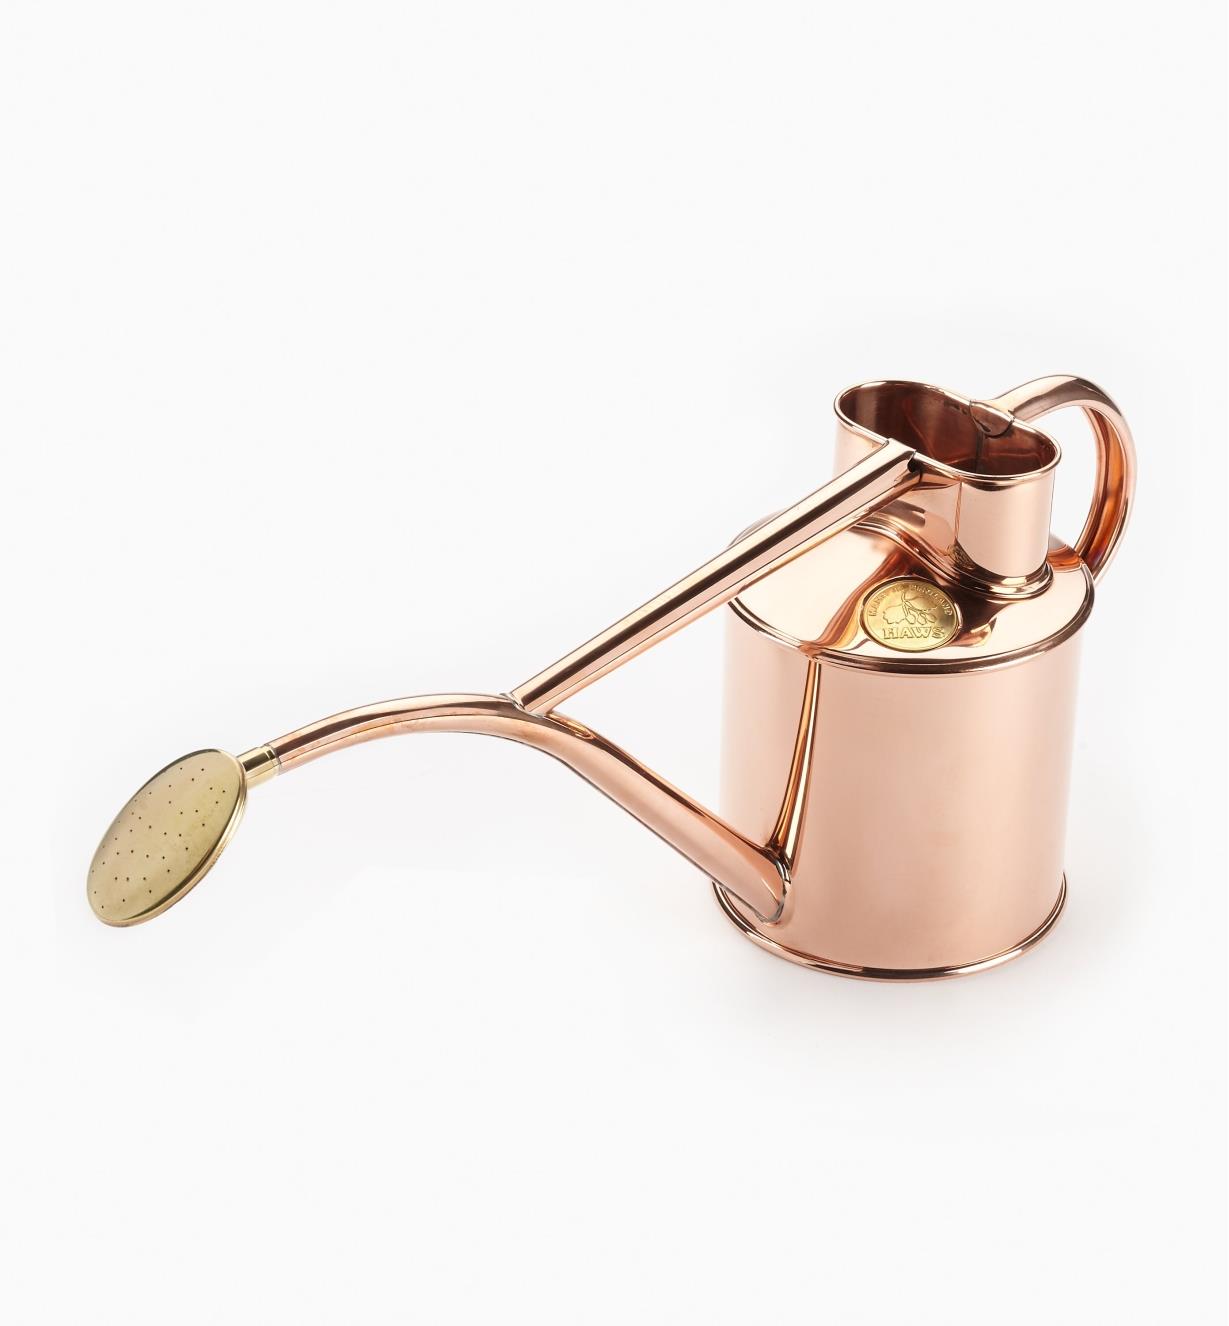 XB907 - Haws Copper Watering Can